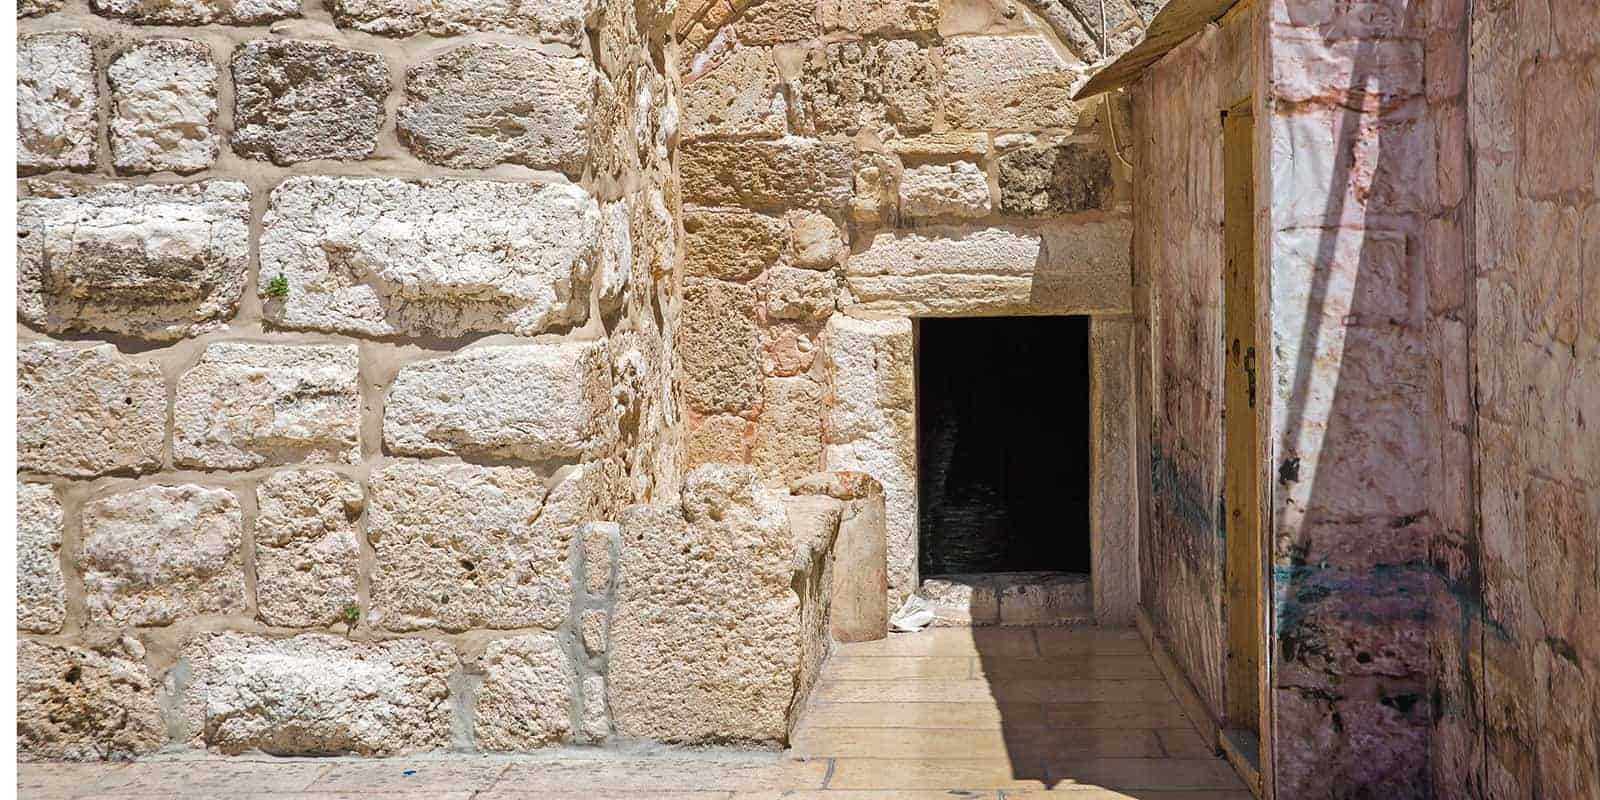 A picture of the Door of Humility, built by Constantine in the 4th century . The doorway leads to the supposed but unknown place of Jesus' birth. The doorway is so small that most people have to bend over to enter.